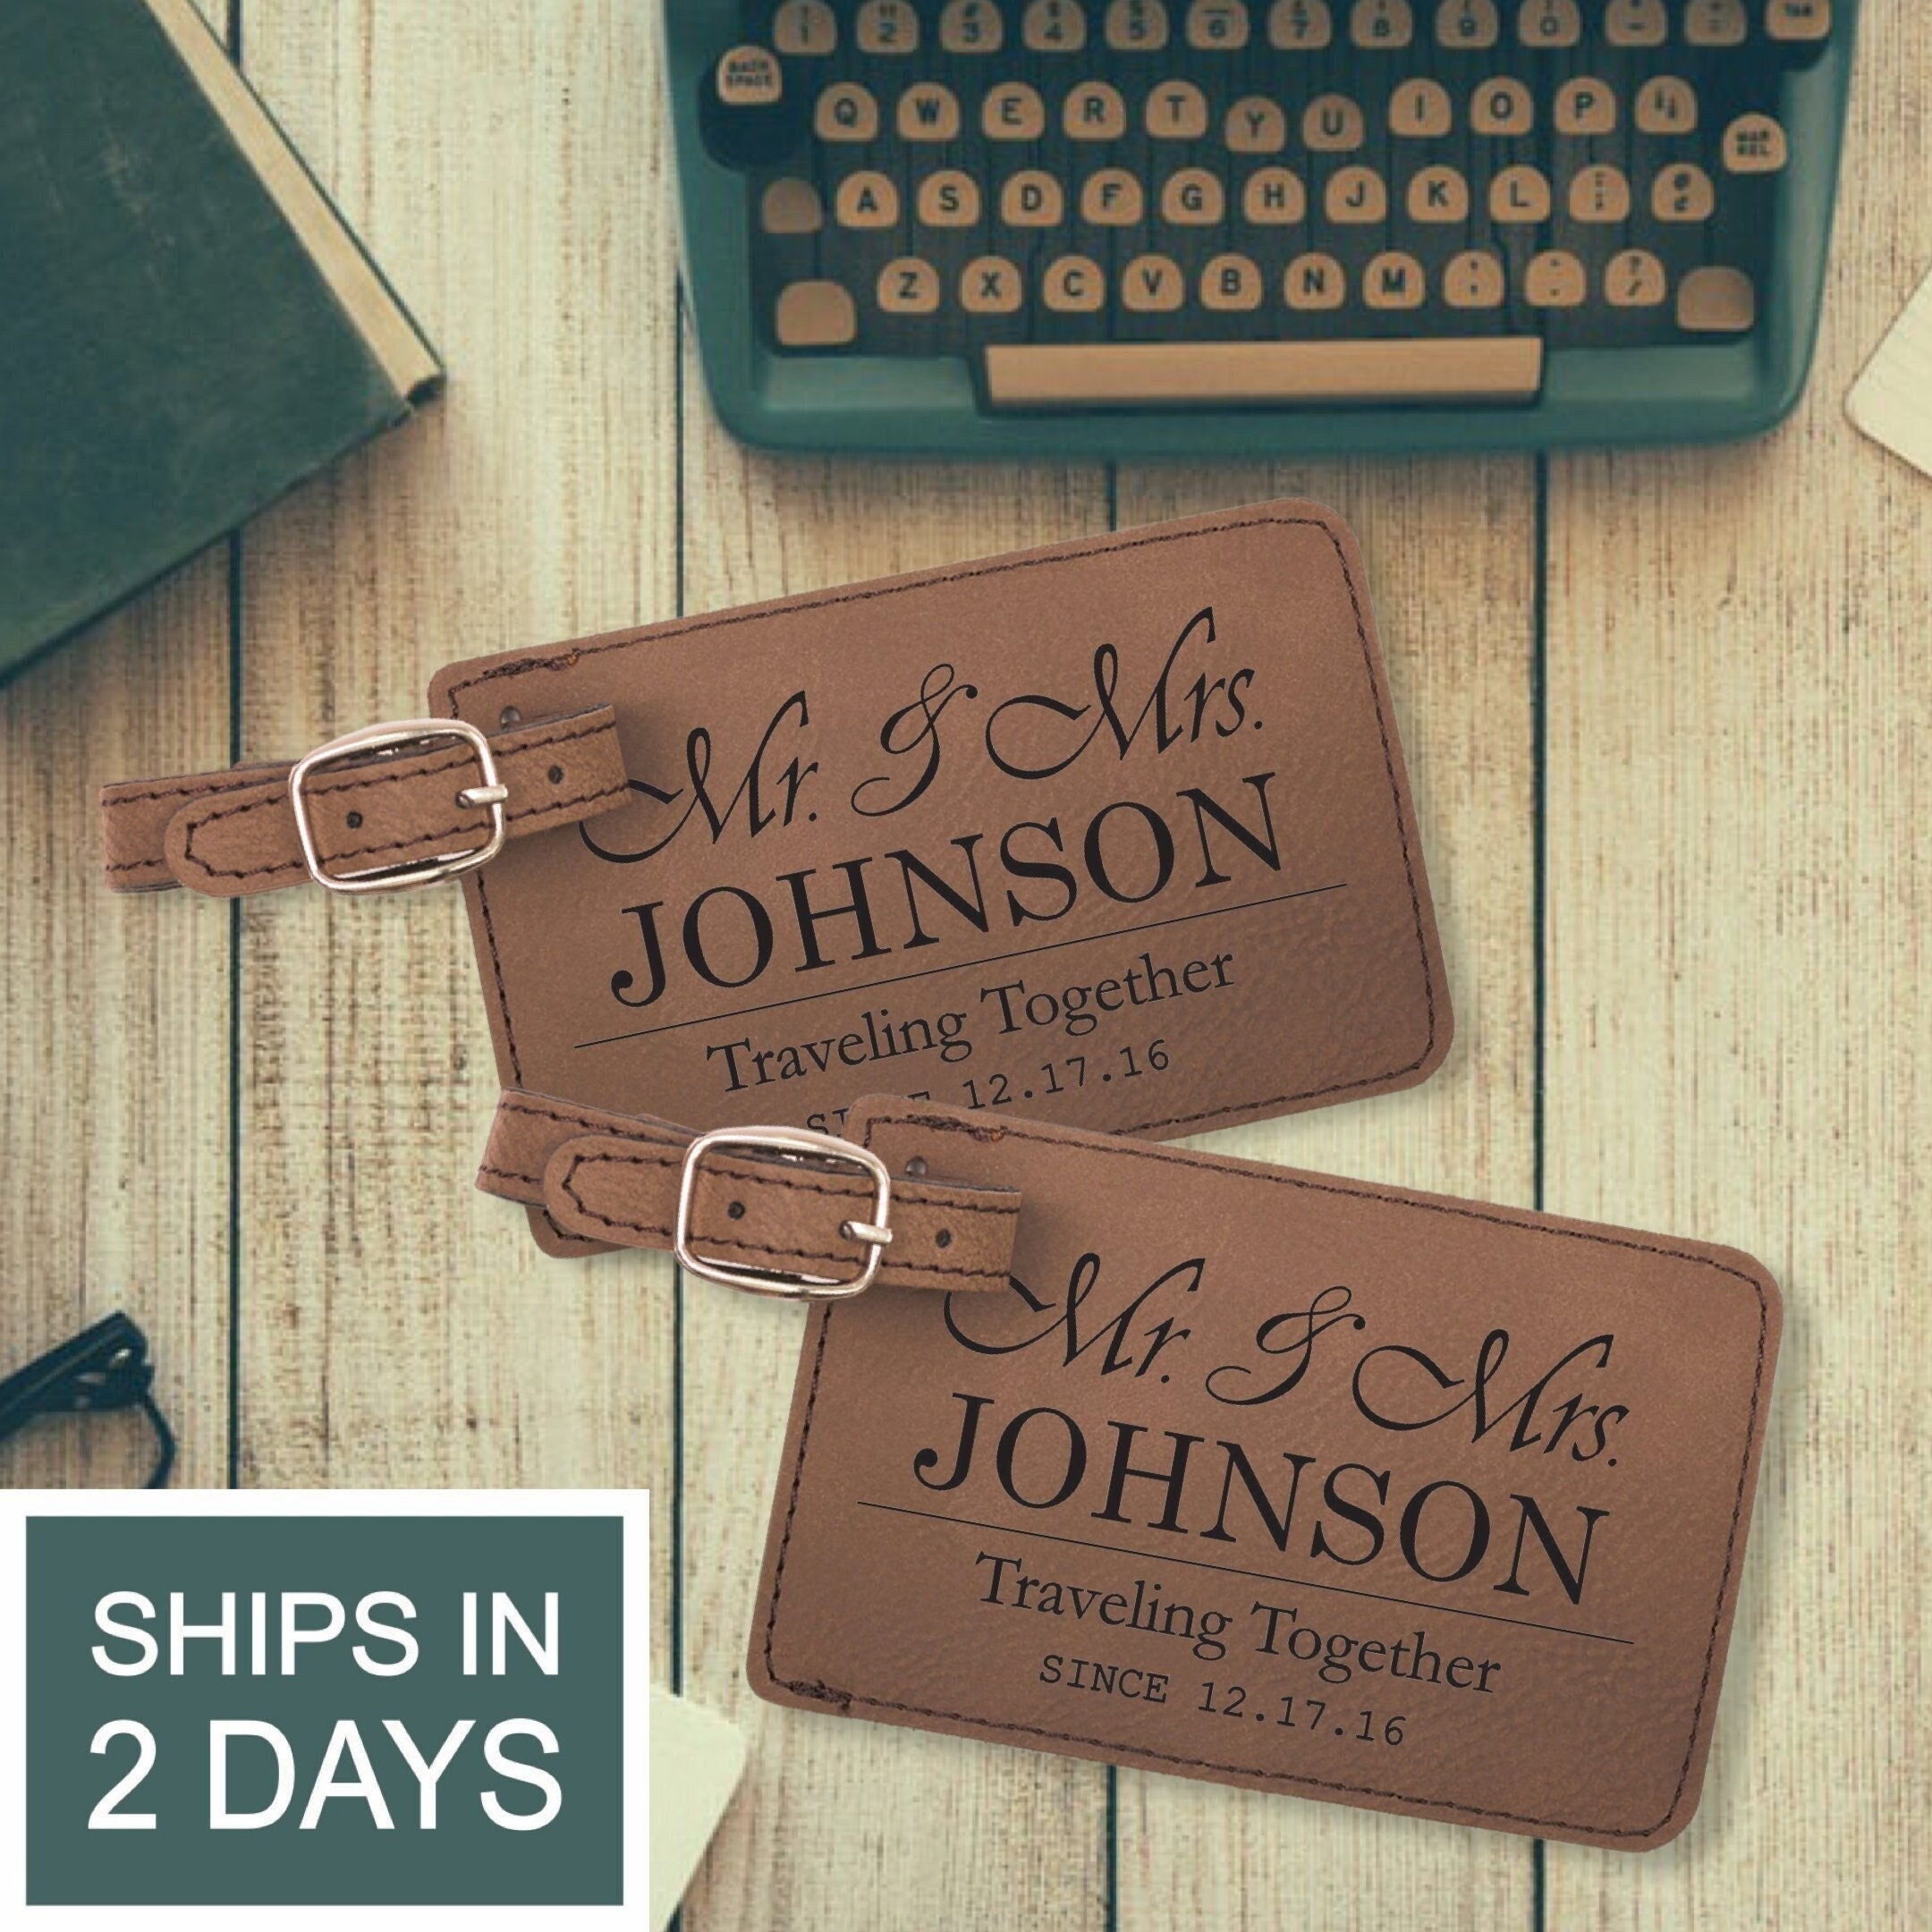 Personalized Luggage Tags - Set of 2 - Mr & Mrs Luggage Tags - Traveling  Together - Wedding Gift - Customized - Travel Tag - Luggage Tag